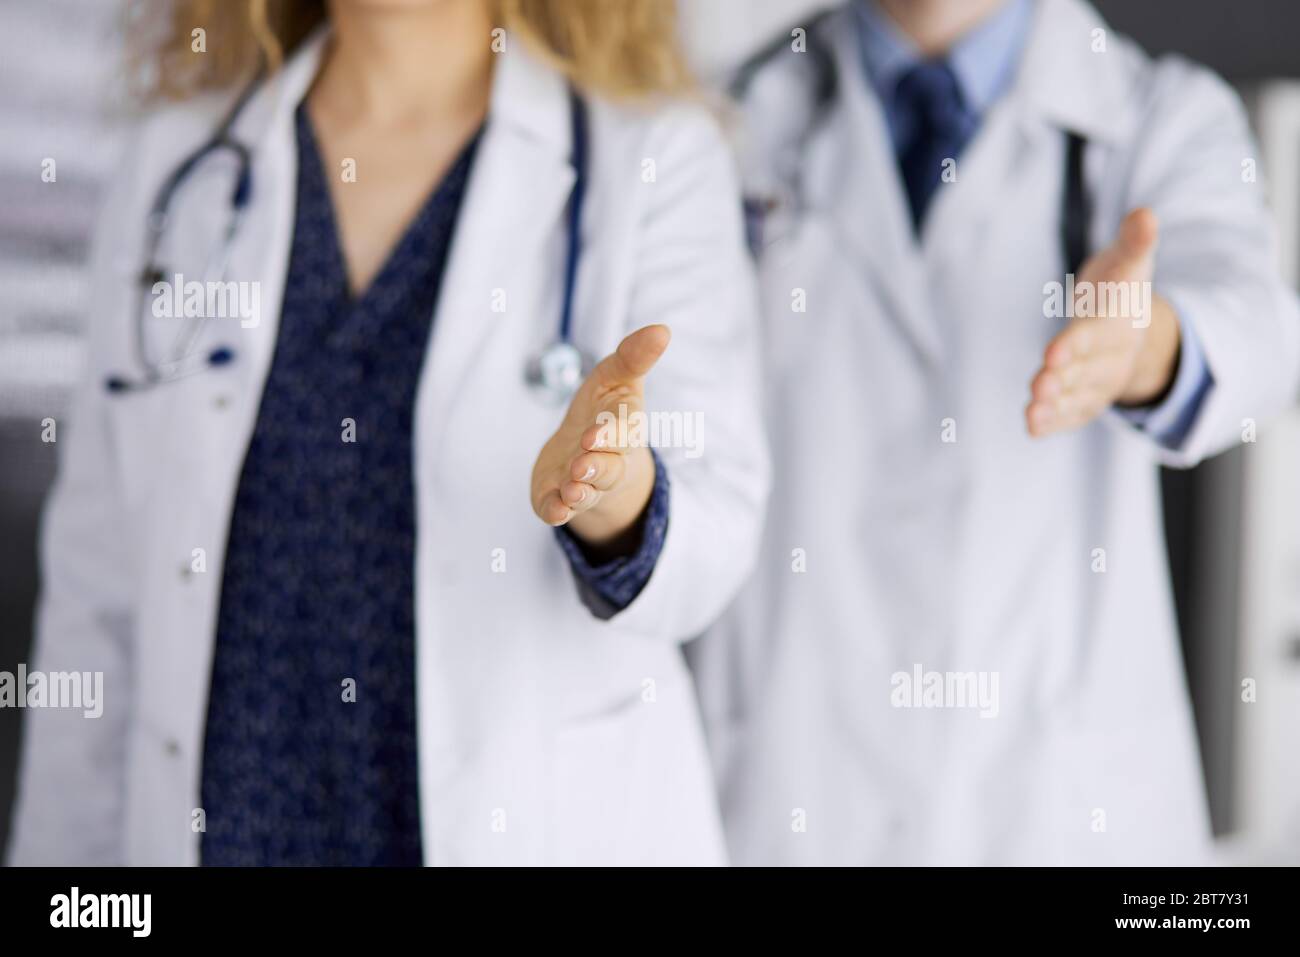 Two doctors standing and offering helping hand for shaking hand or saving life. Medical help, countering viral infection and medicine concept Stock Photo